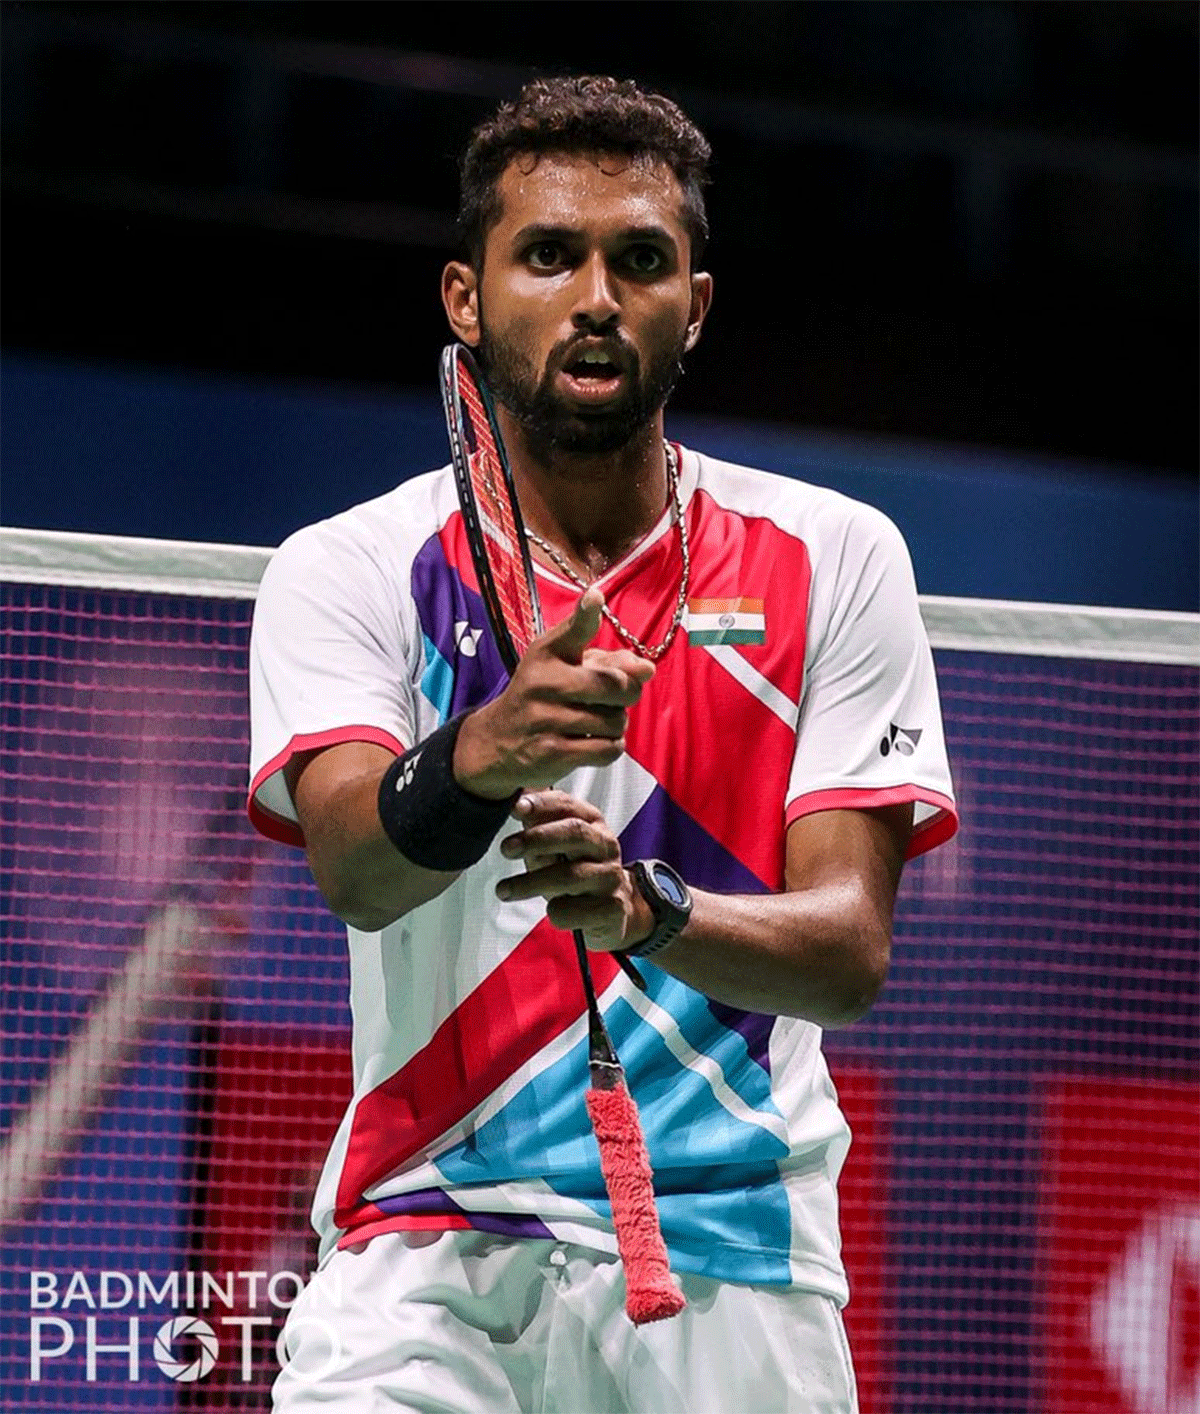 HS Prannoy had to dig deep in the second game to pocket the match and advance at the BWF World Championships 